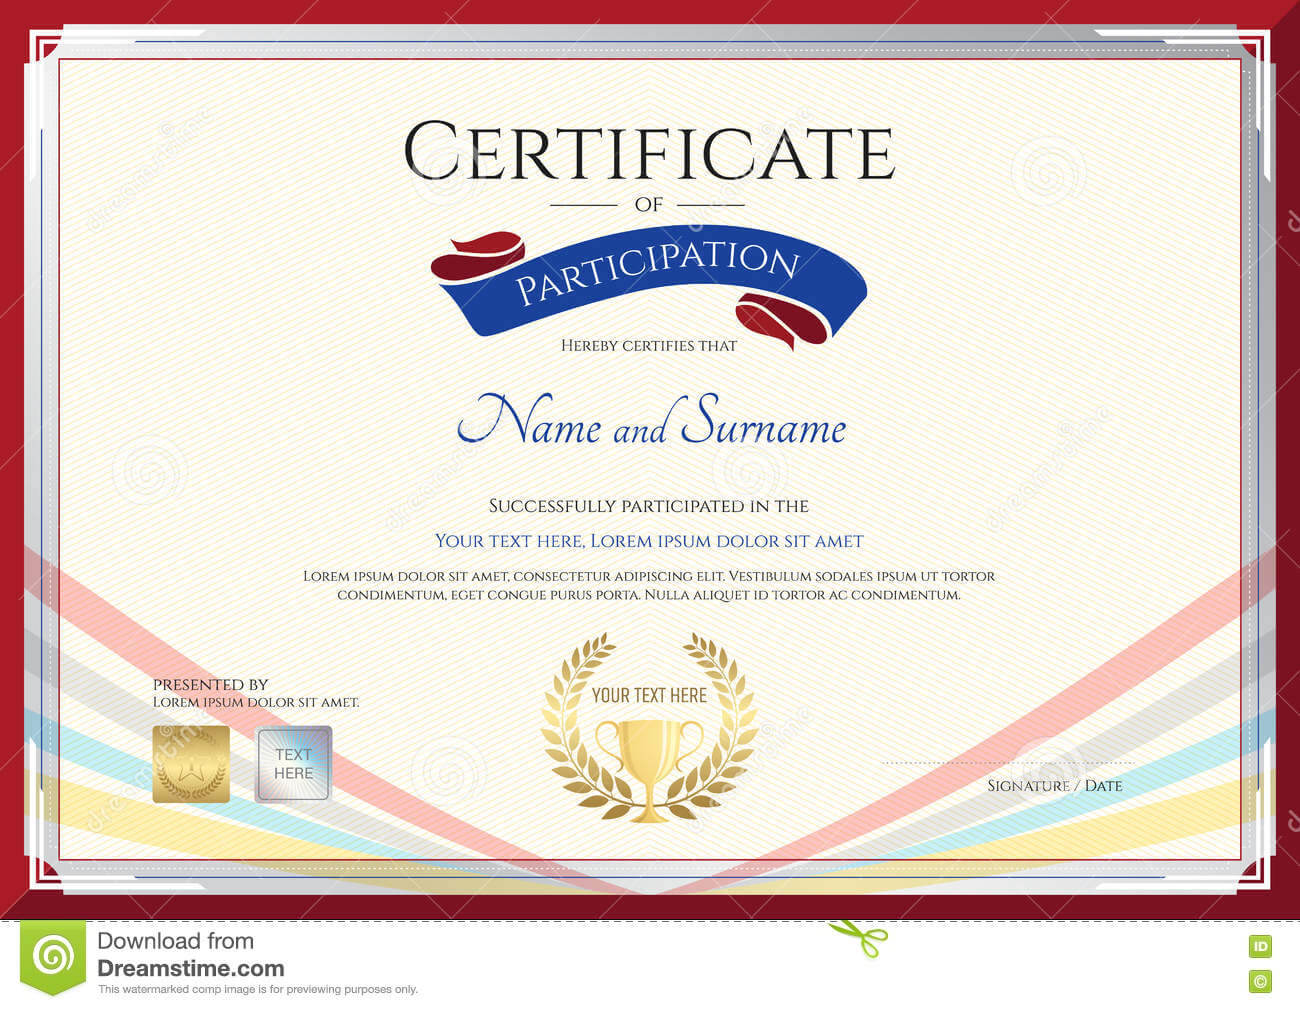 Certificate Template For Achievement, Appreciation Or With Participation Certificate Templates Free Download